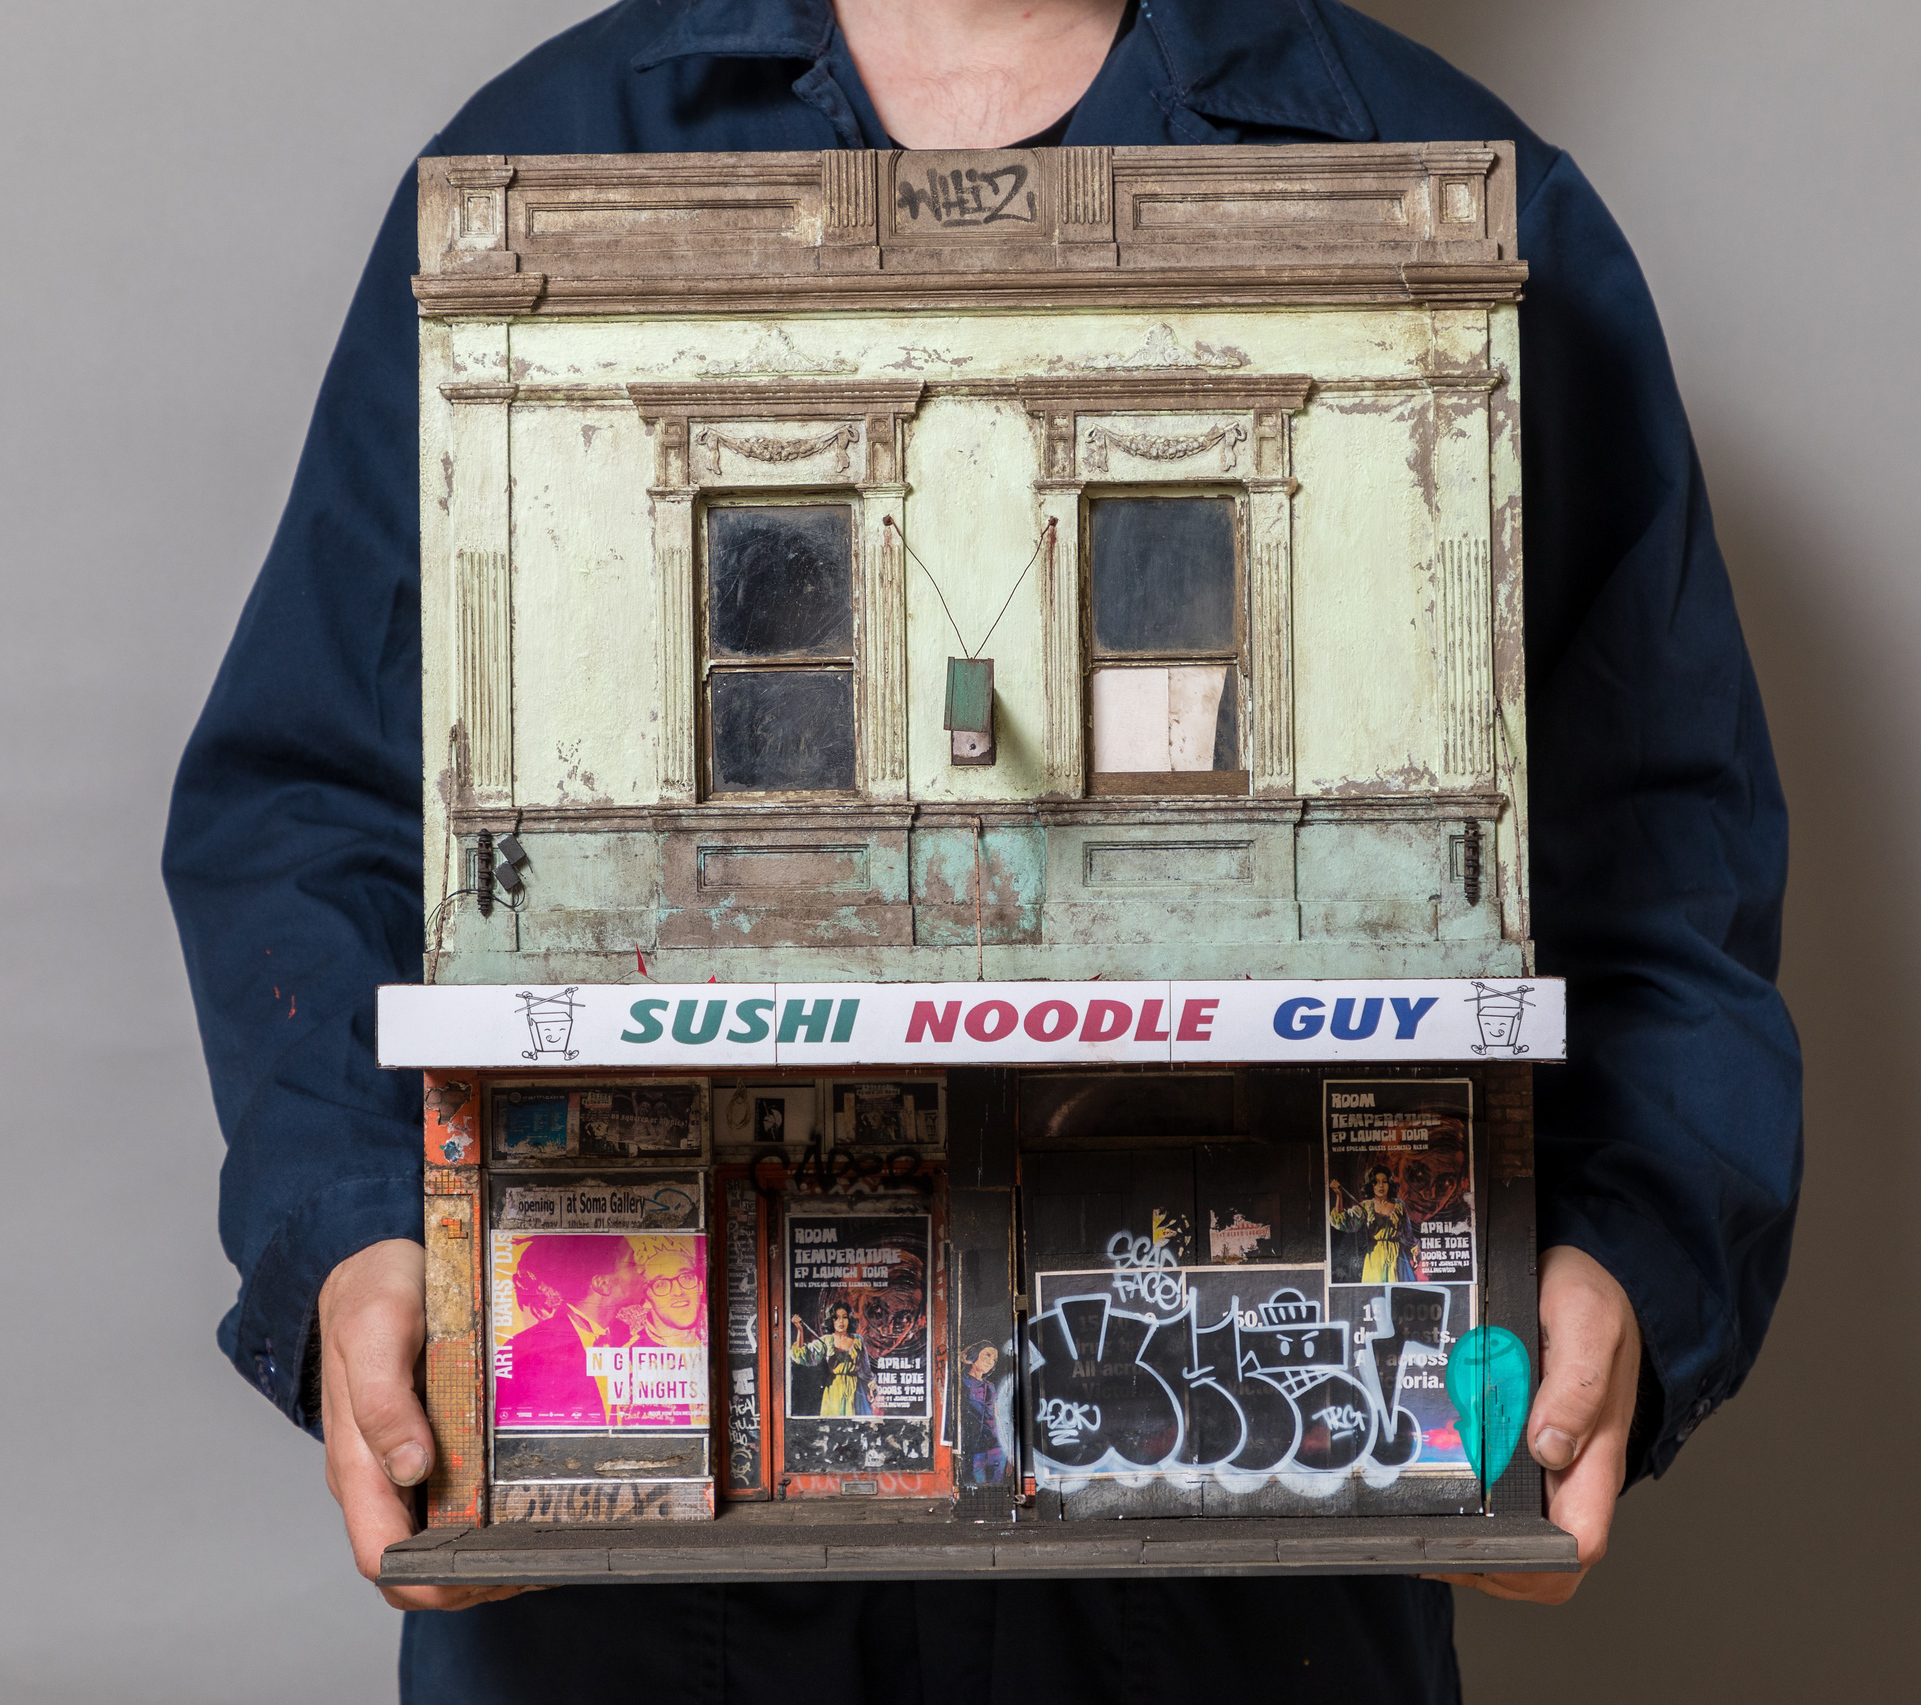 A figure holds a 1:20 scale miniature sculpture of a facade of a shop with posters and graffiti on it.